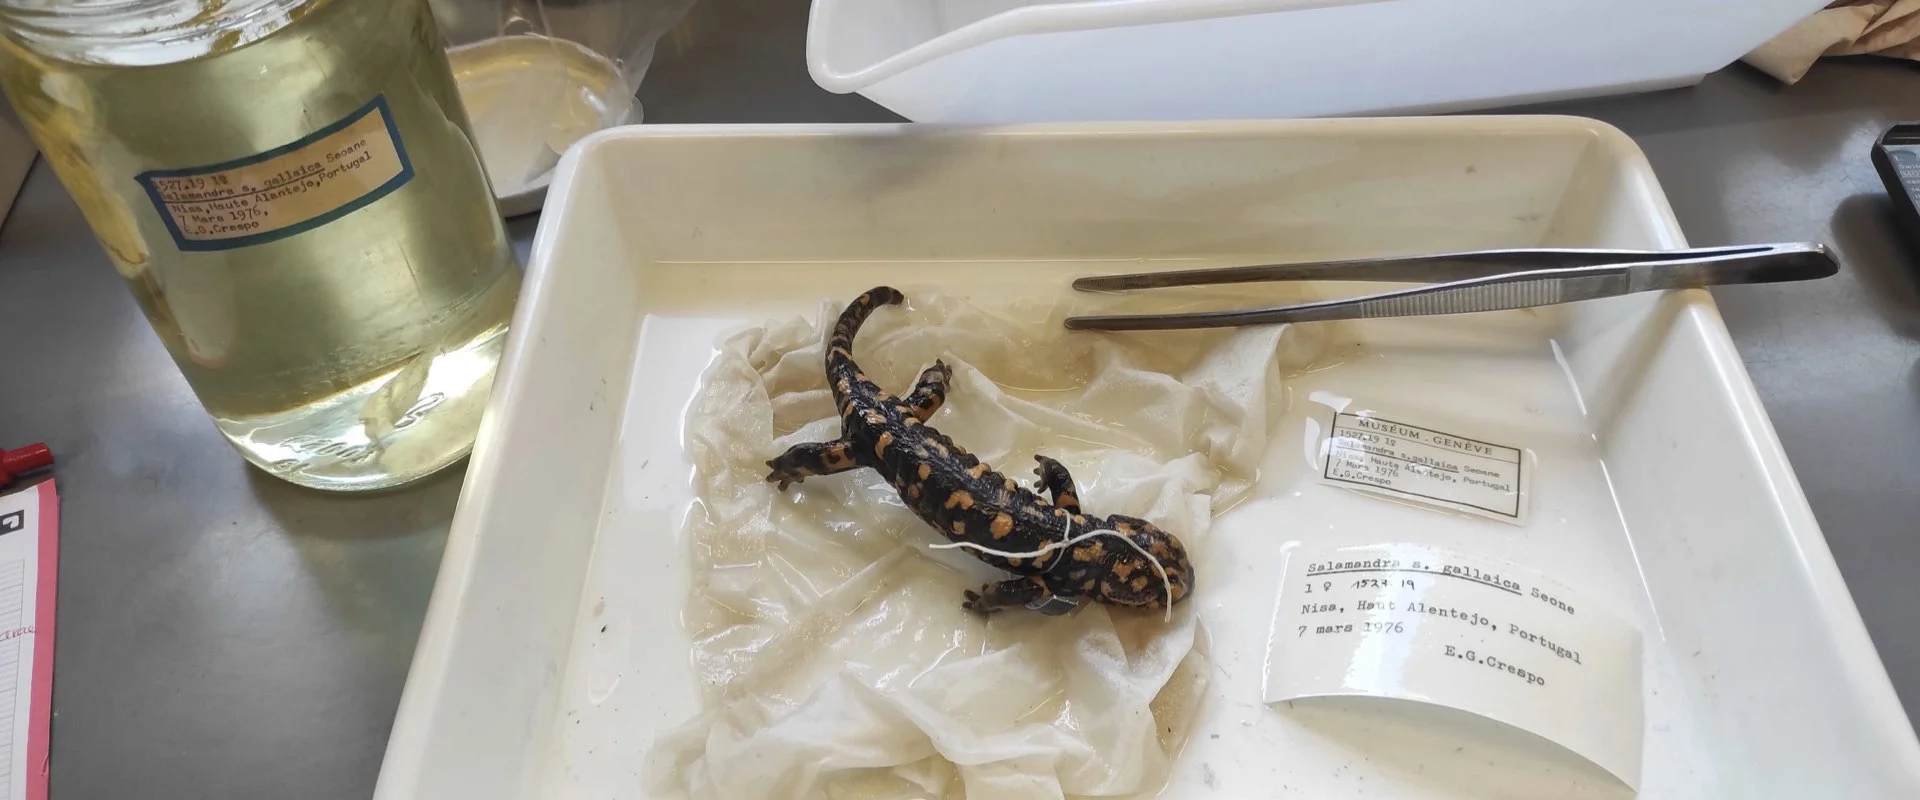 A preserved salamander specimen in a tray